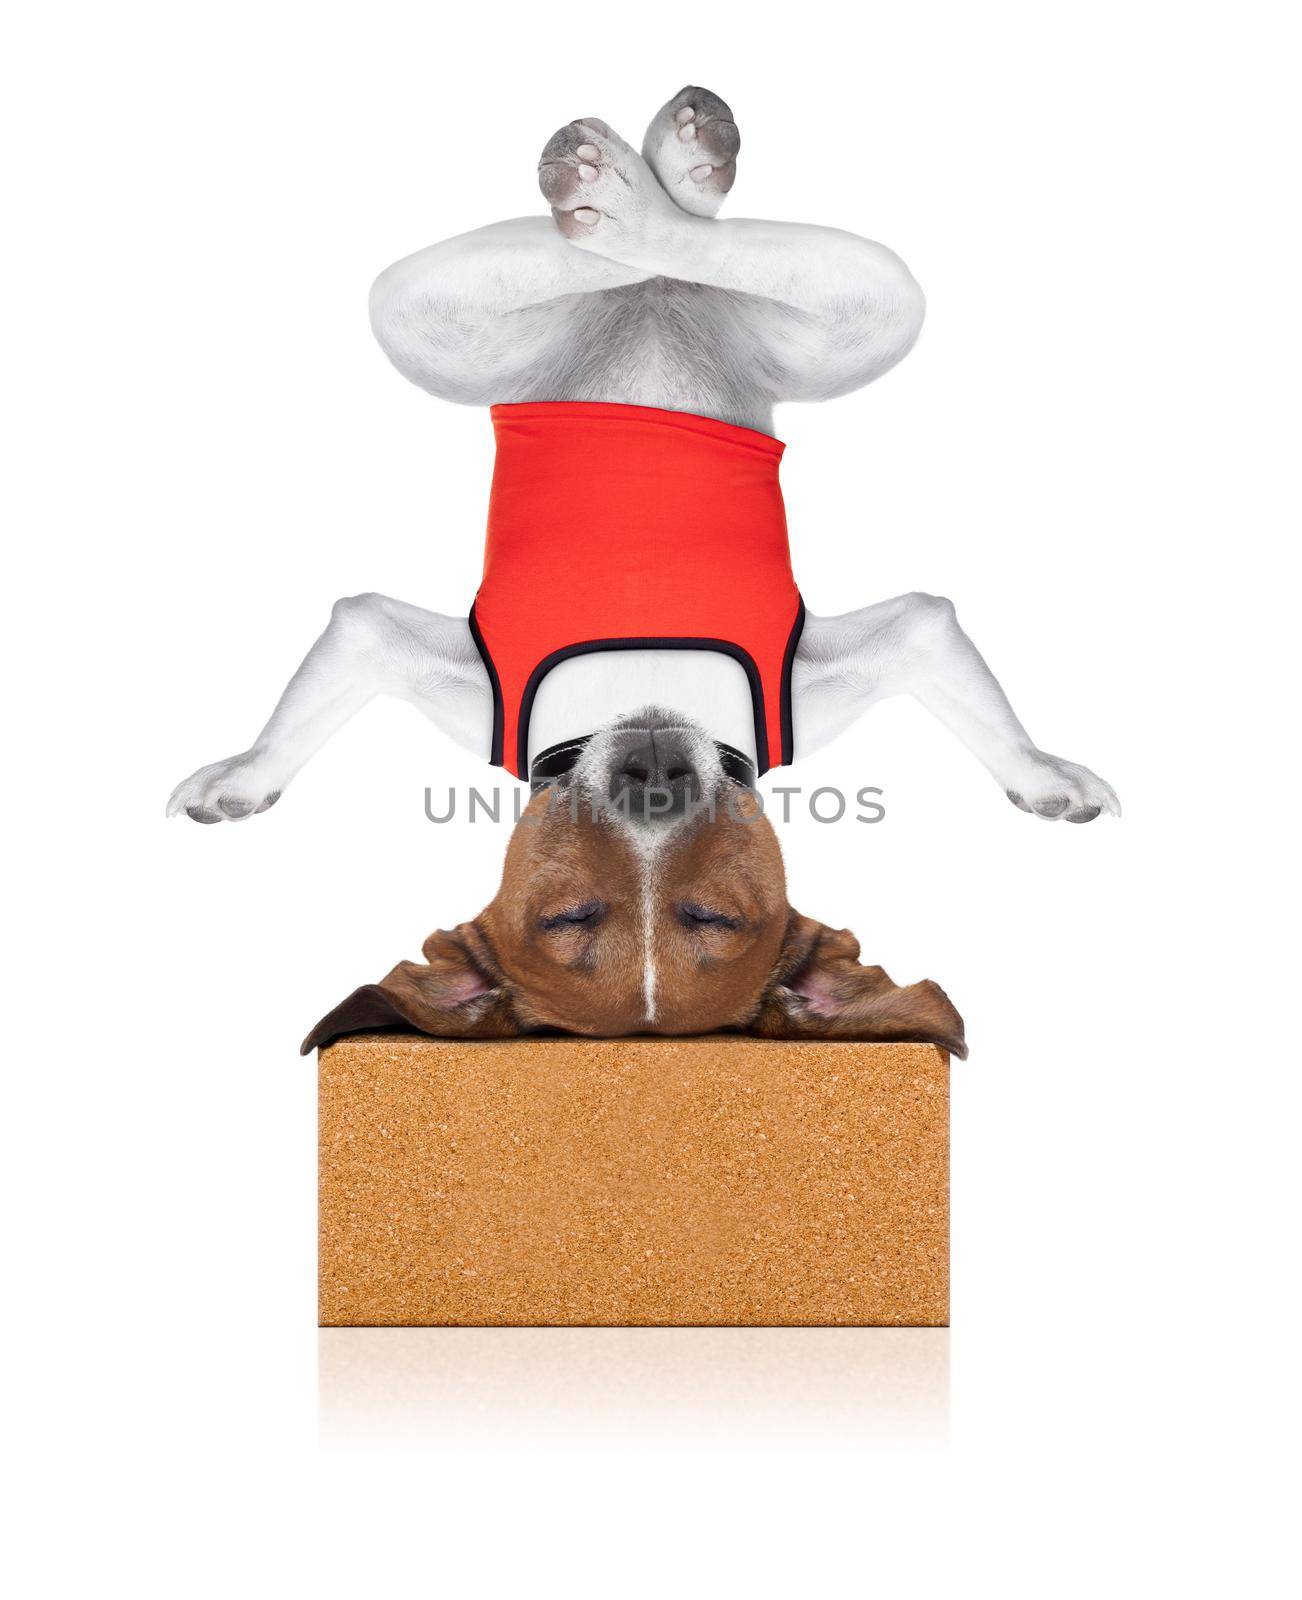 yoga dog sitting relaxed with closed eyes thinking deeply on a brick